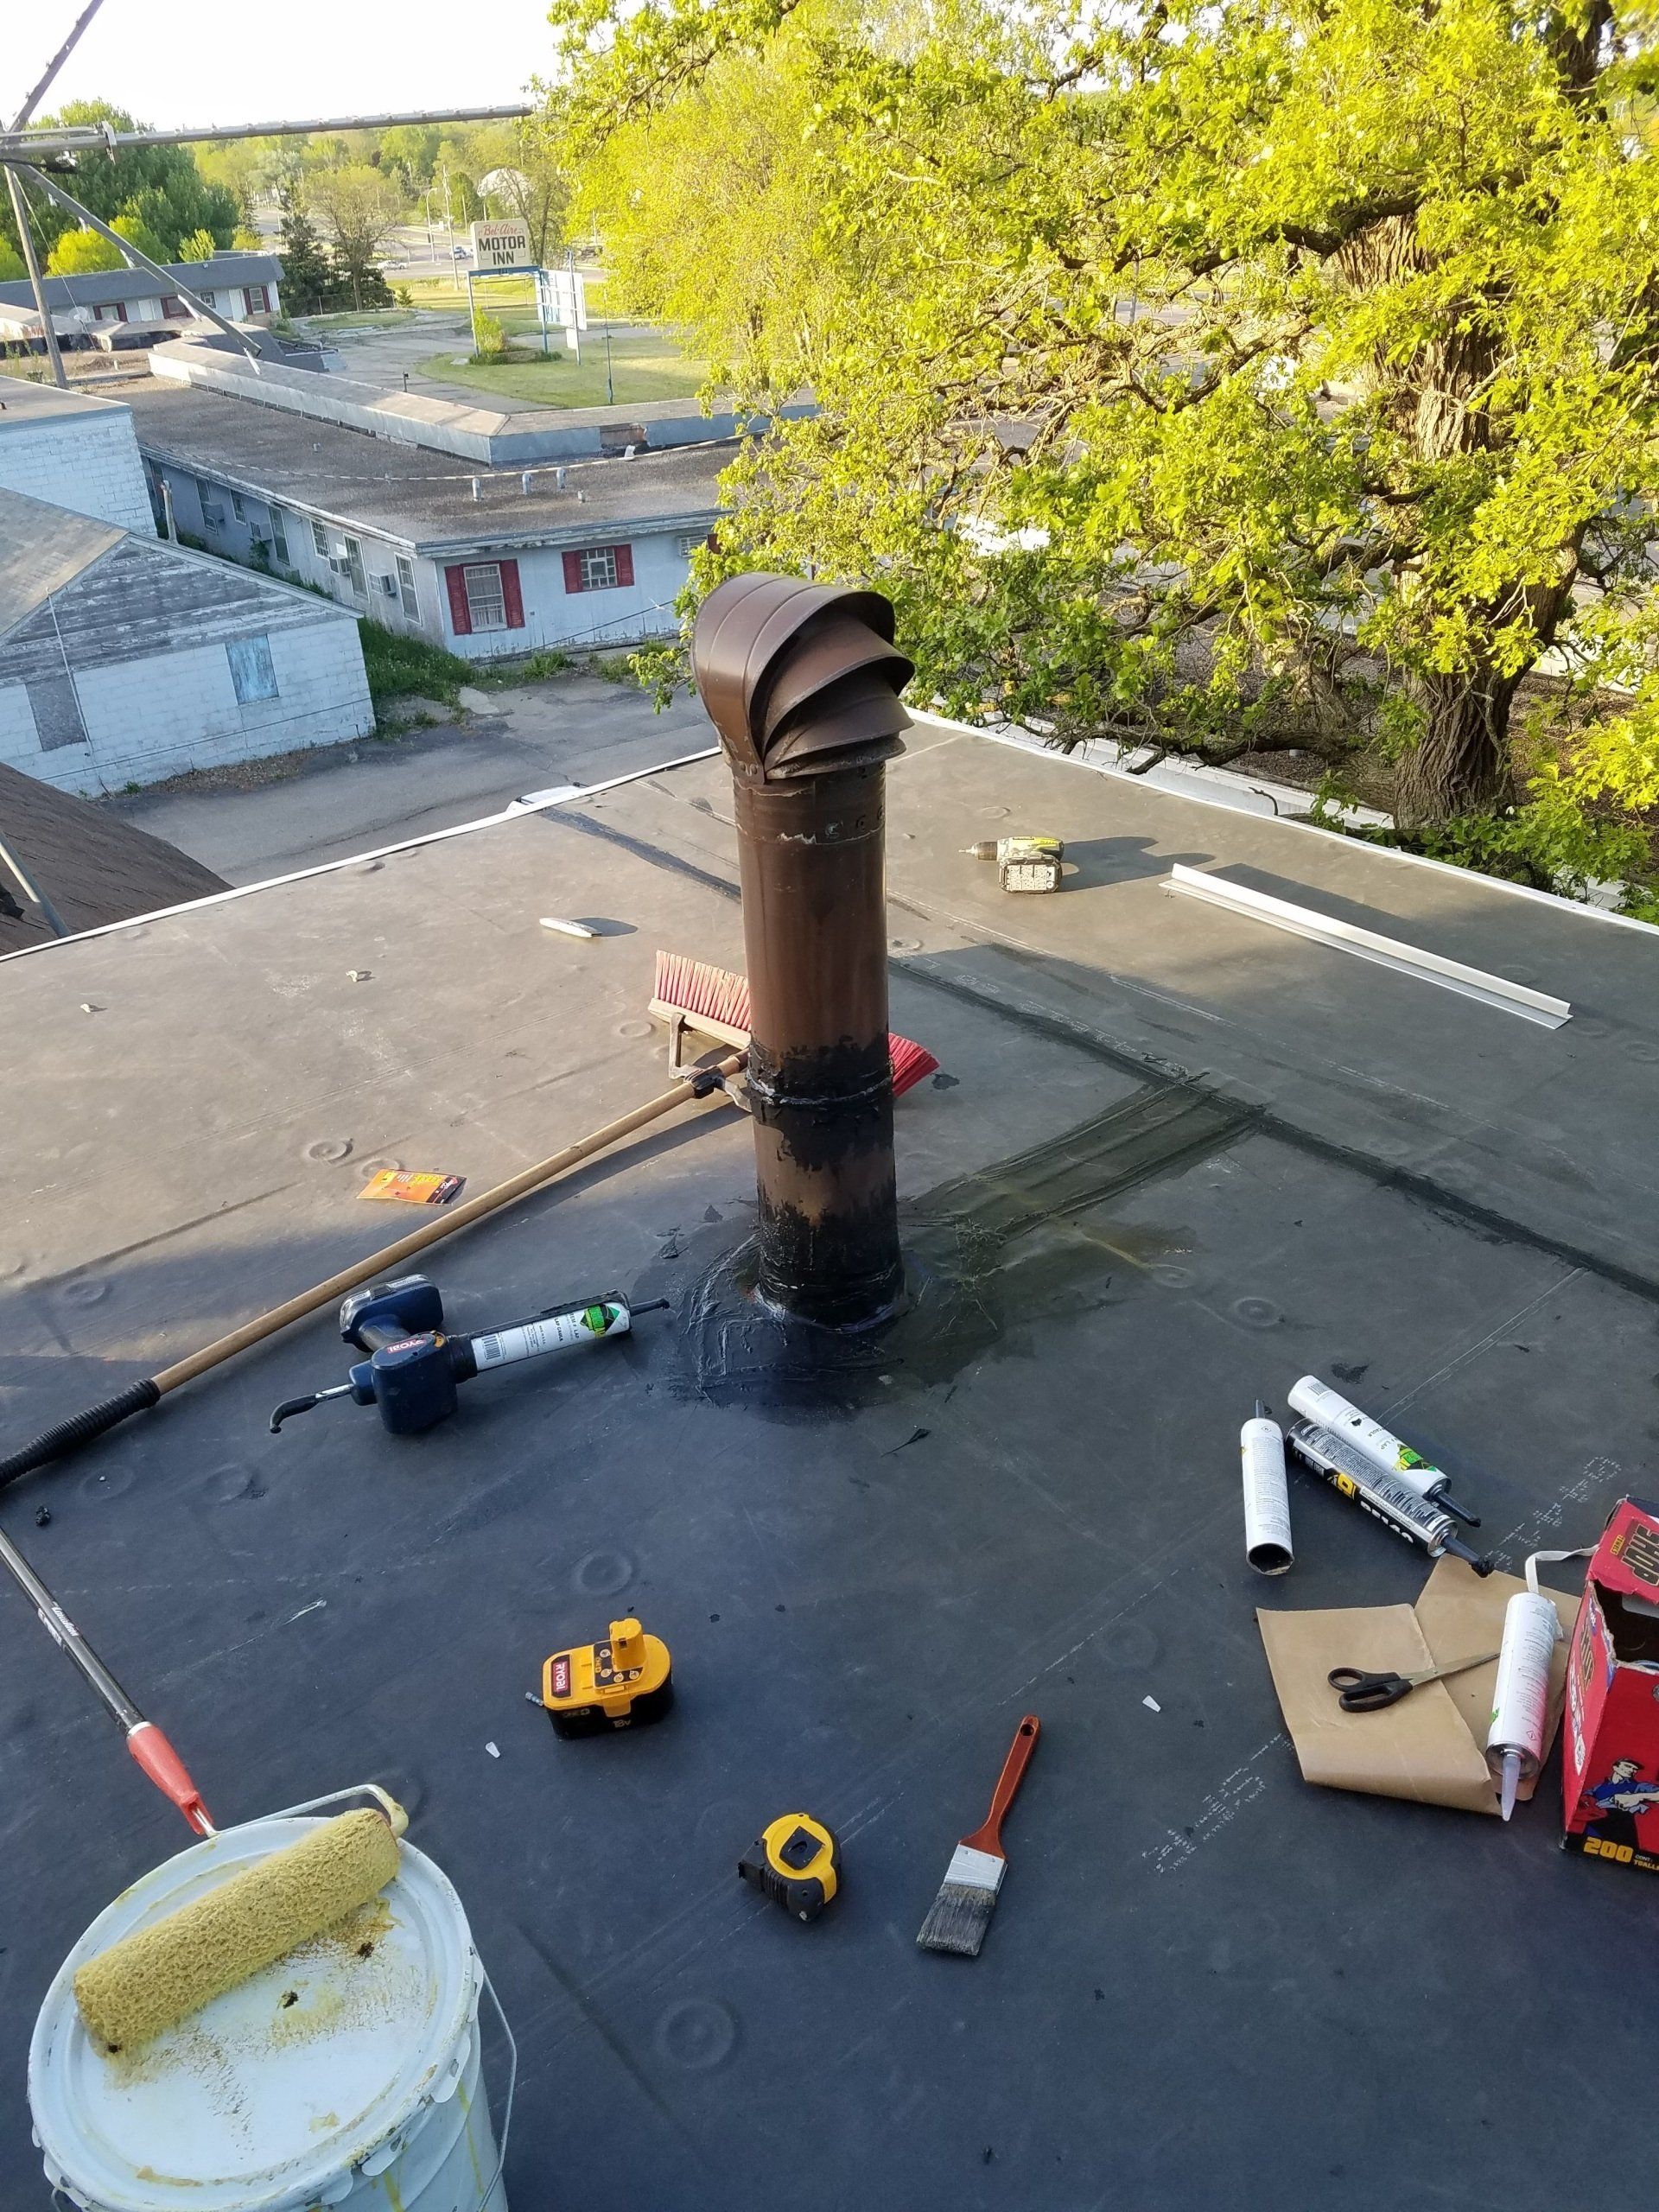 The Technician Wearing Safety Uniforms - New Richland, MN - Tom’s Miller’s Roofing